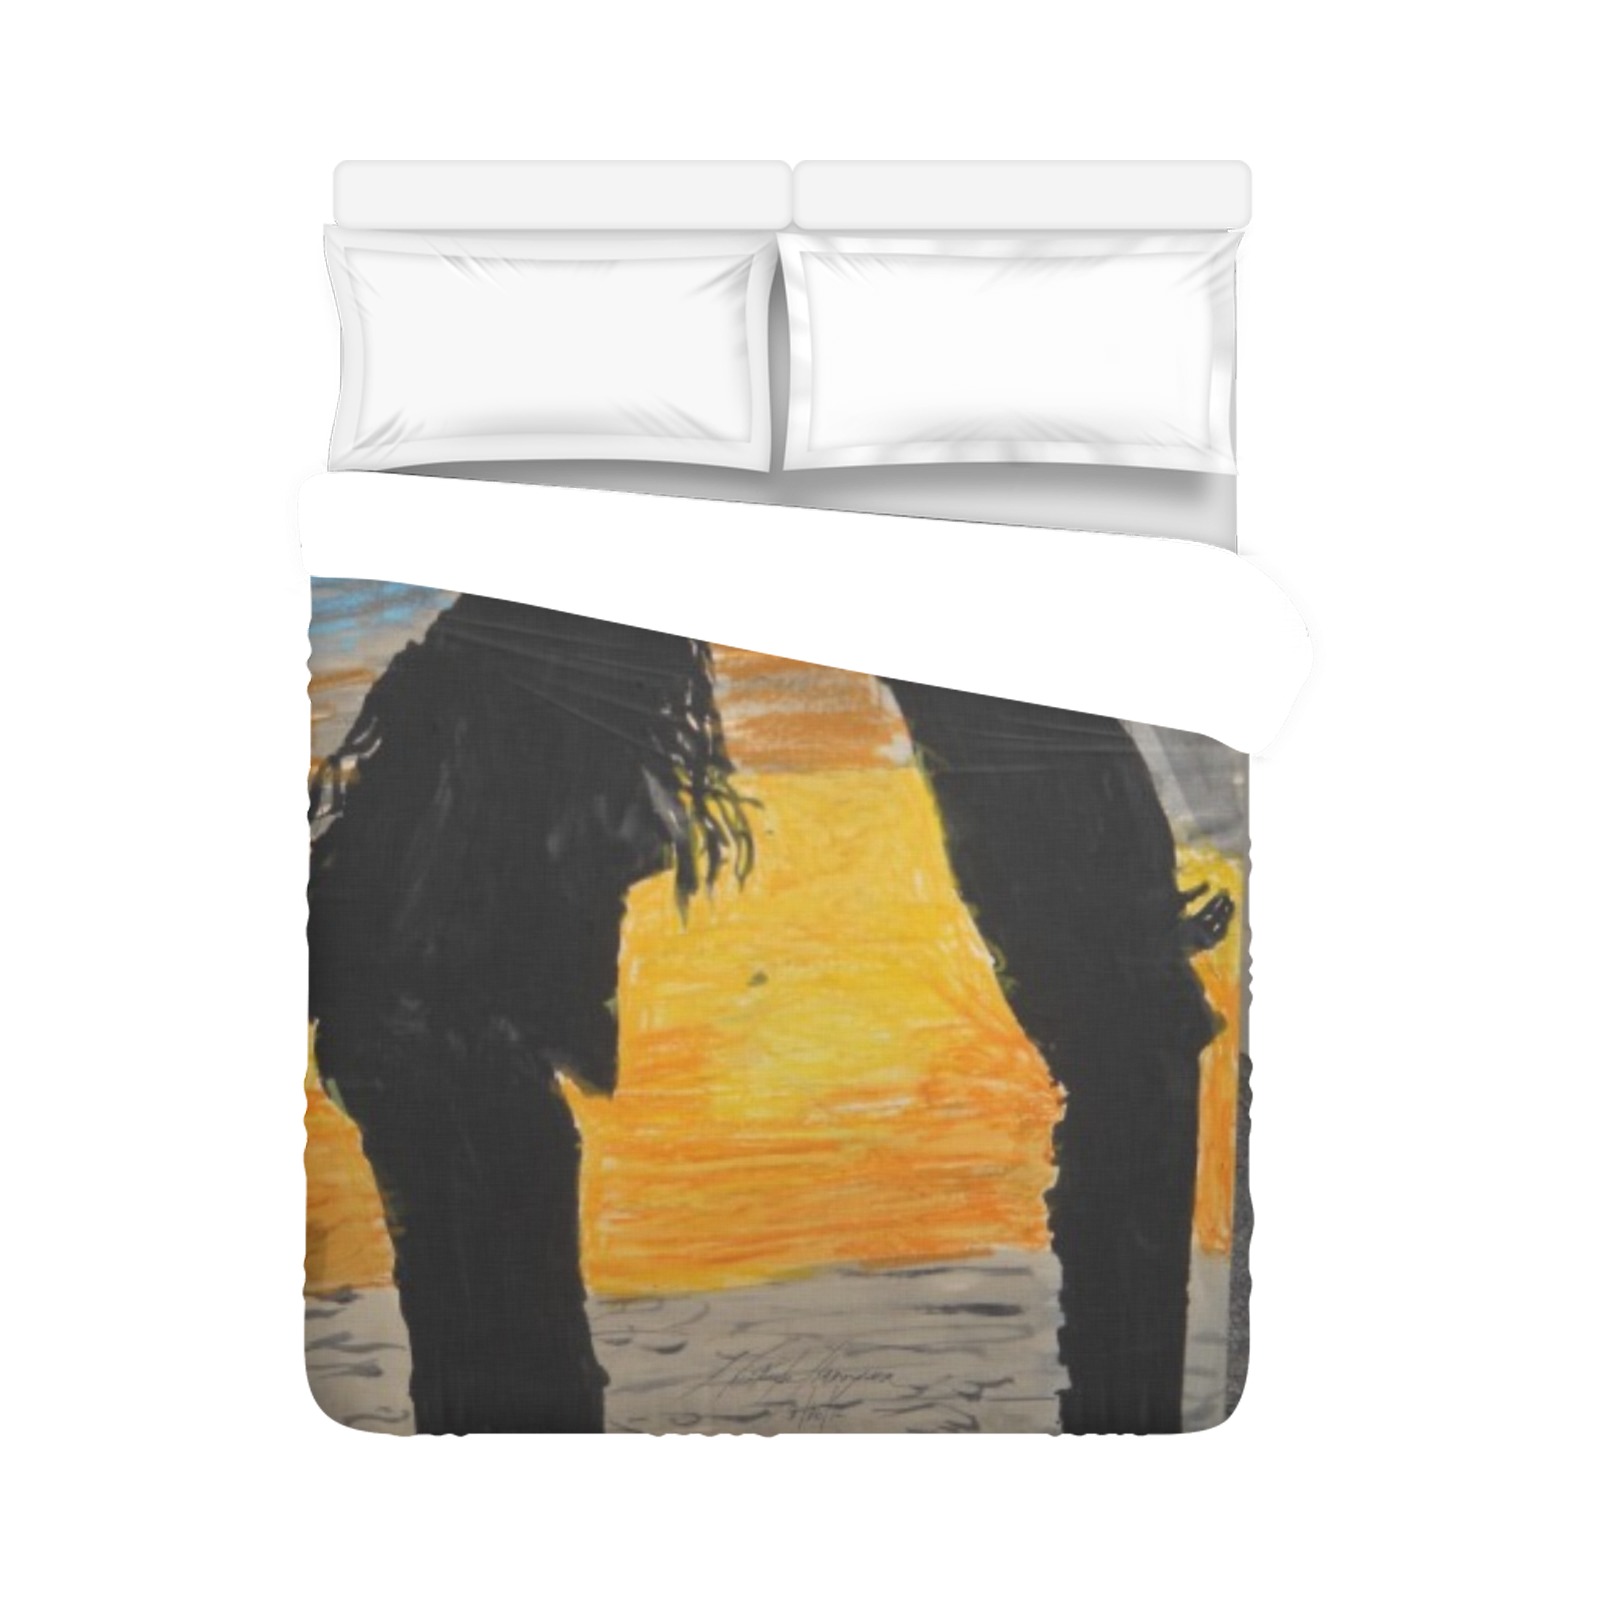 young sunset lovers Duvet Cover 86"x70" ( All-over-print)